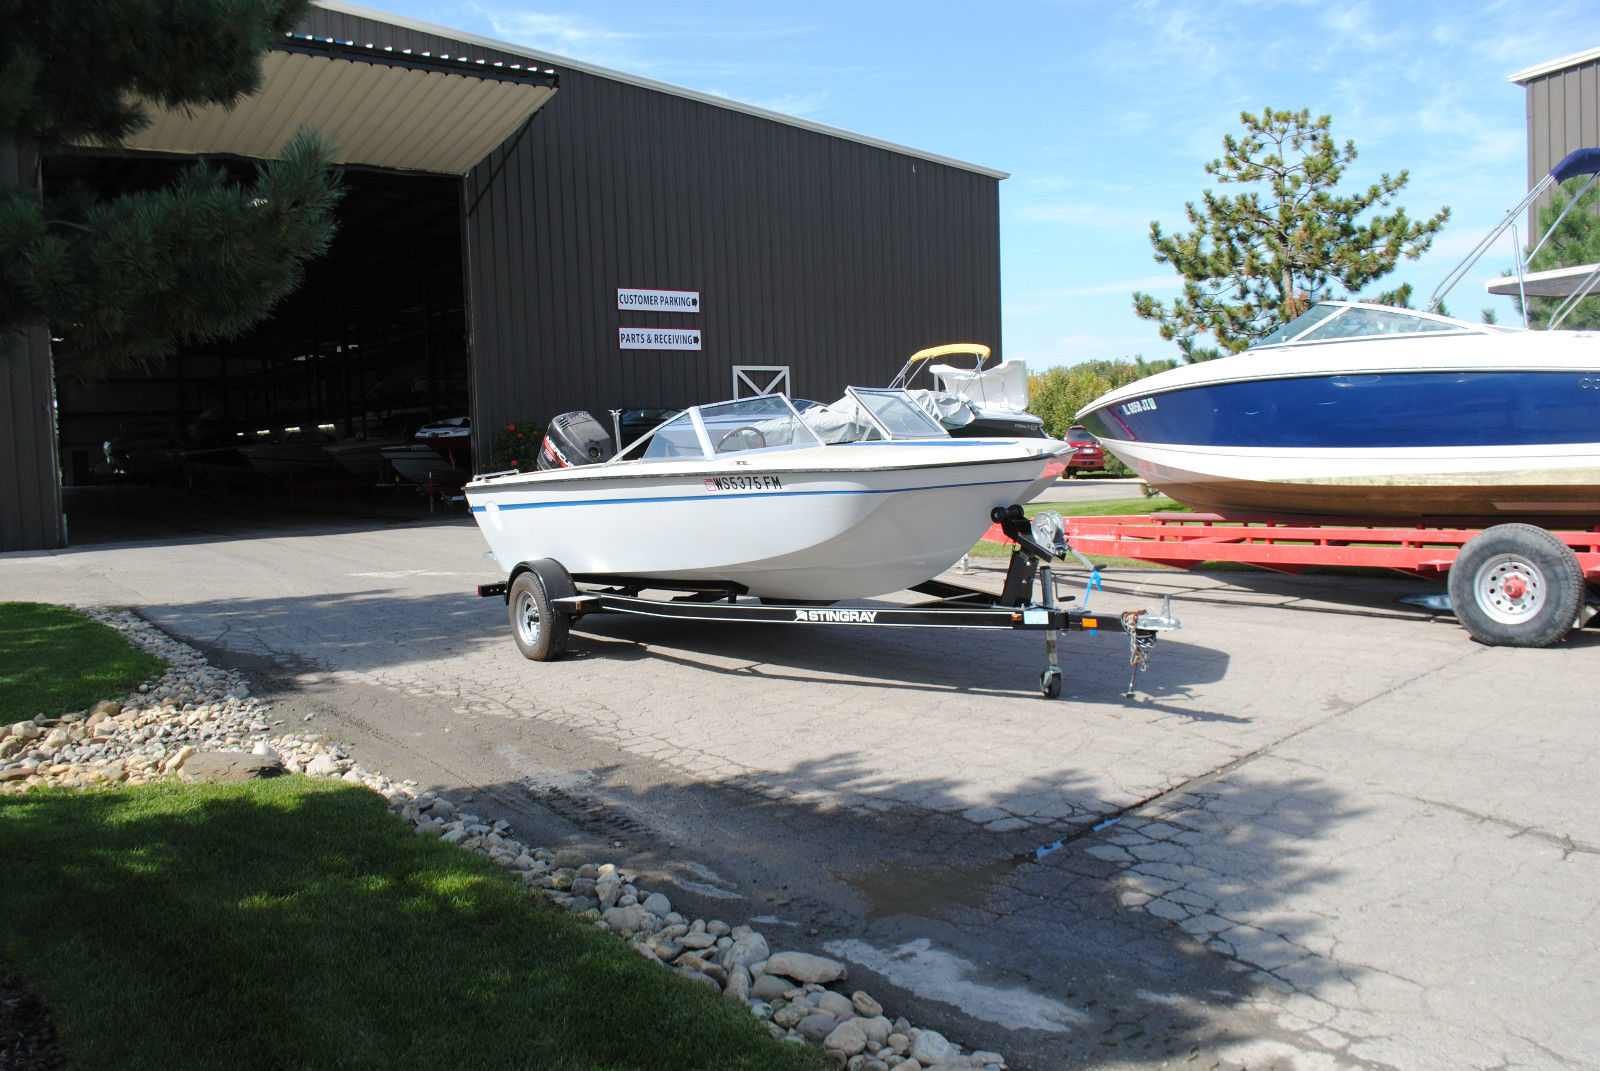 Switzer Craft Boat For Sale From Usa 8704